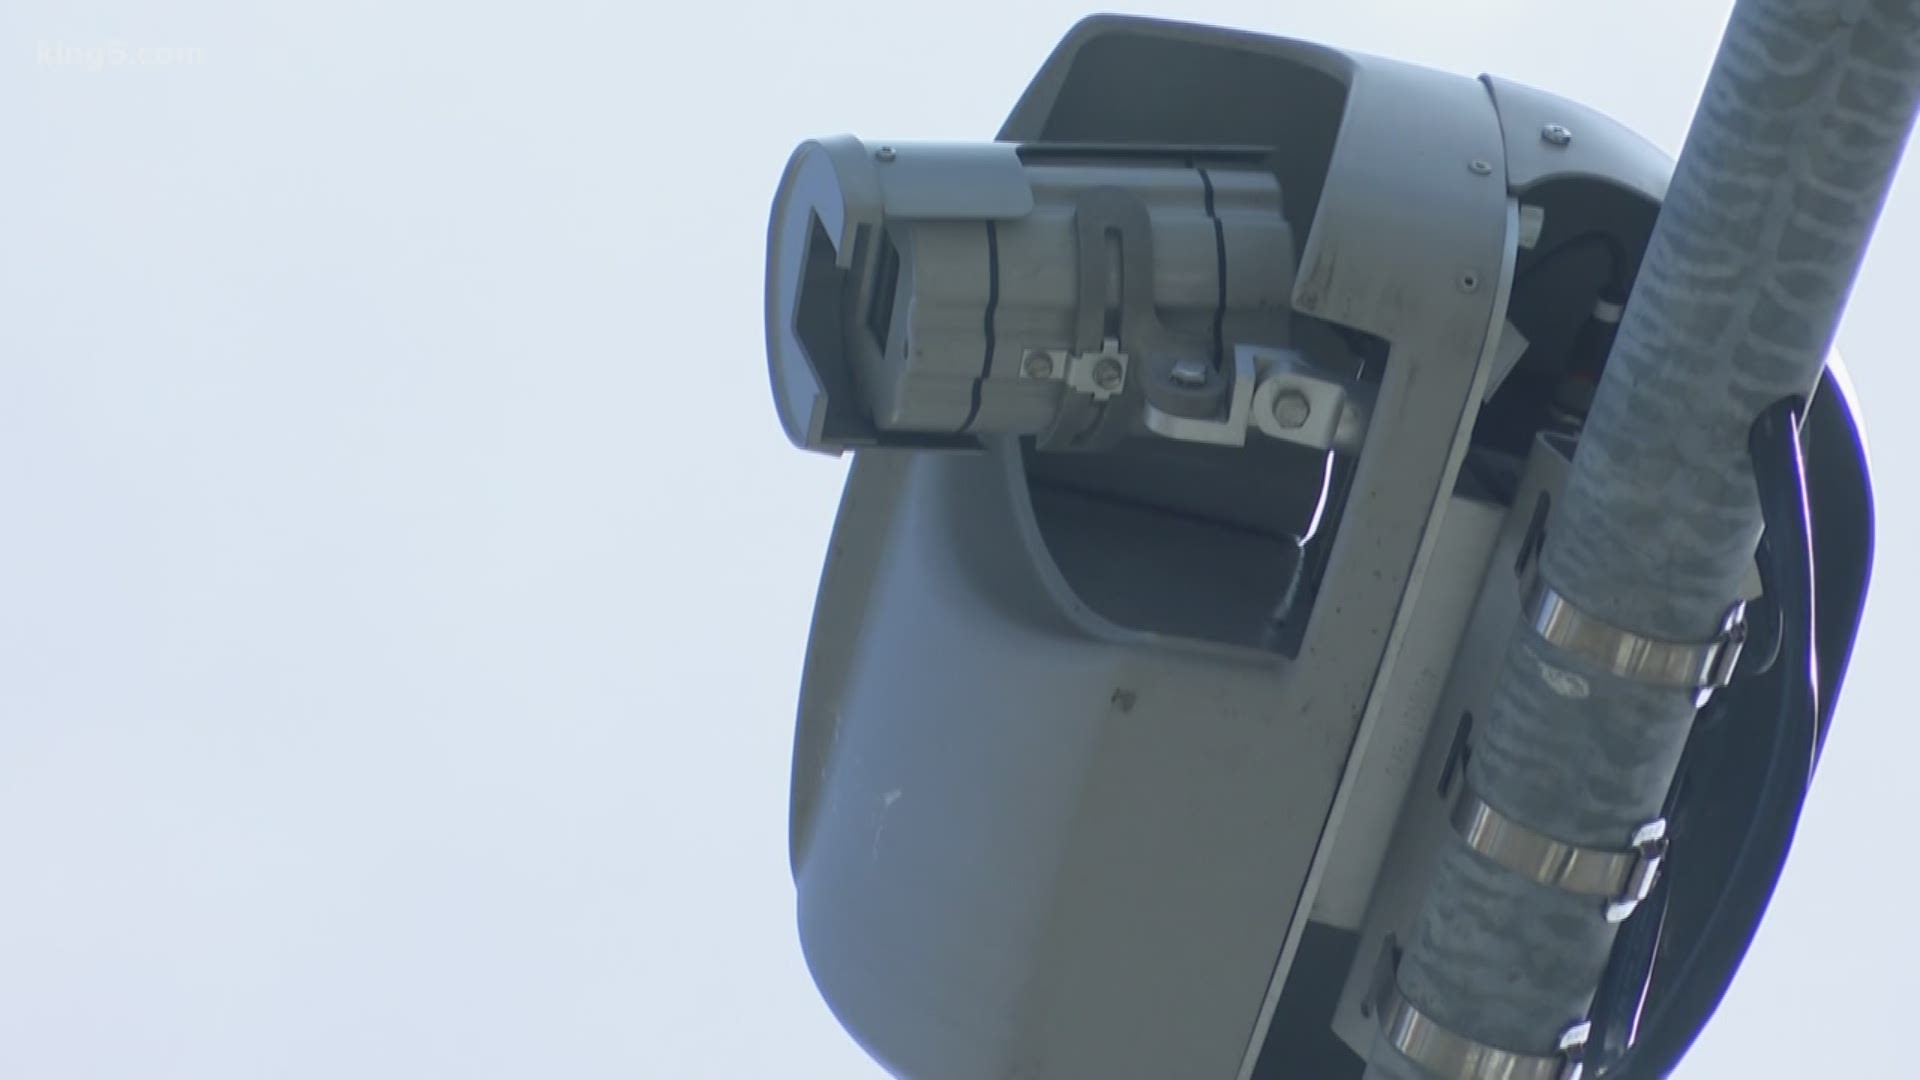 Kent intersections with the highest collision rates now have cameras catching drivers who break the law.